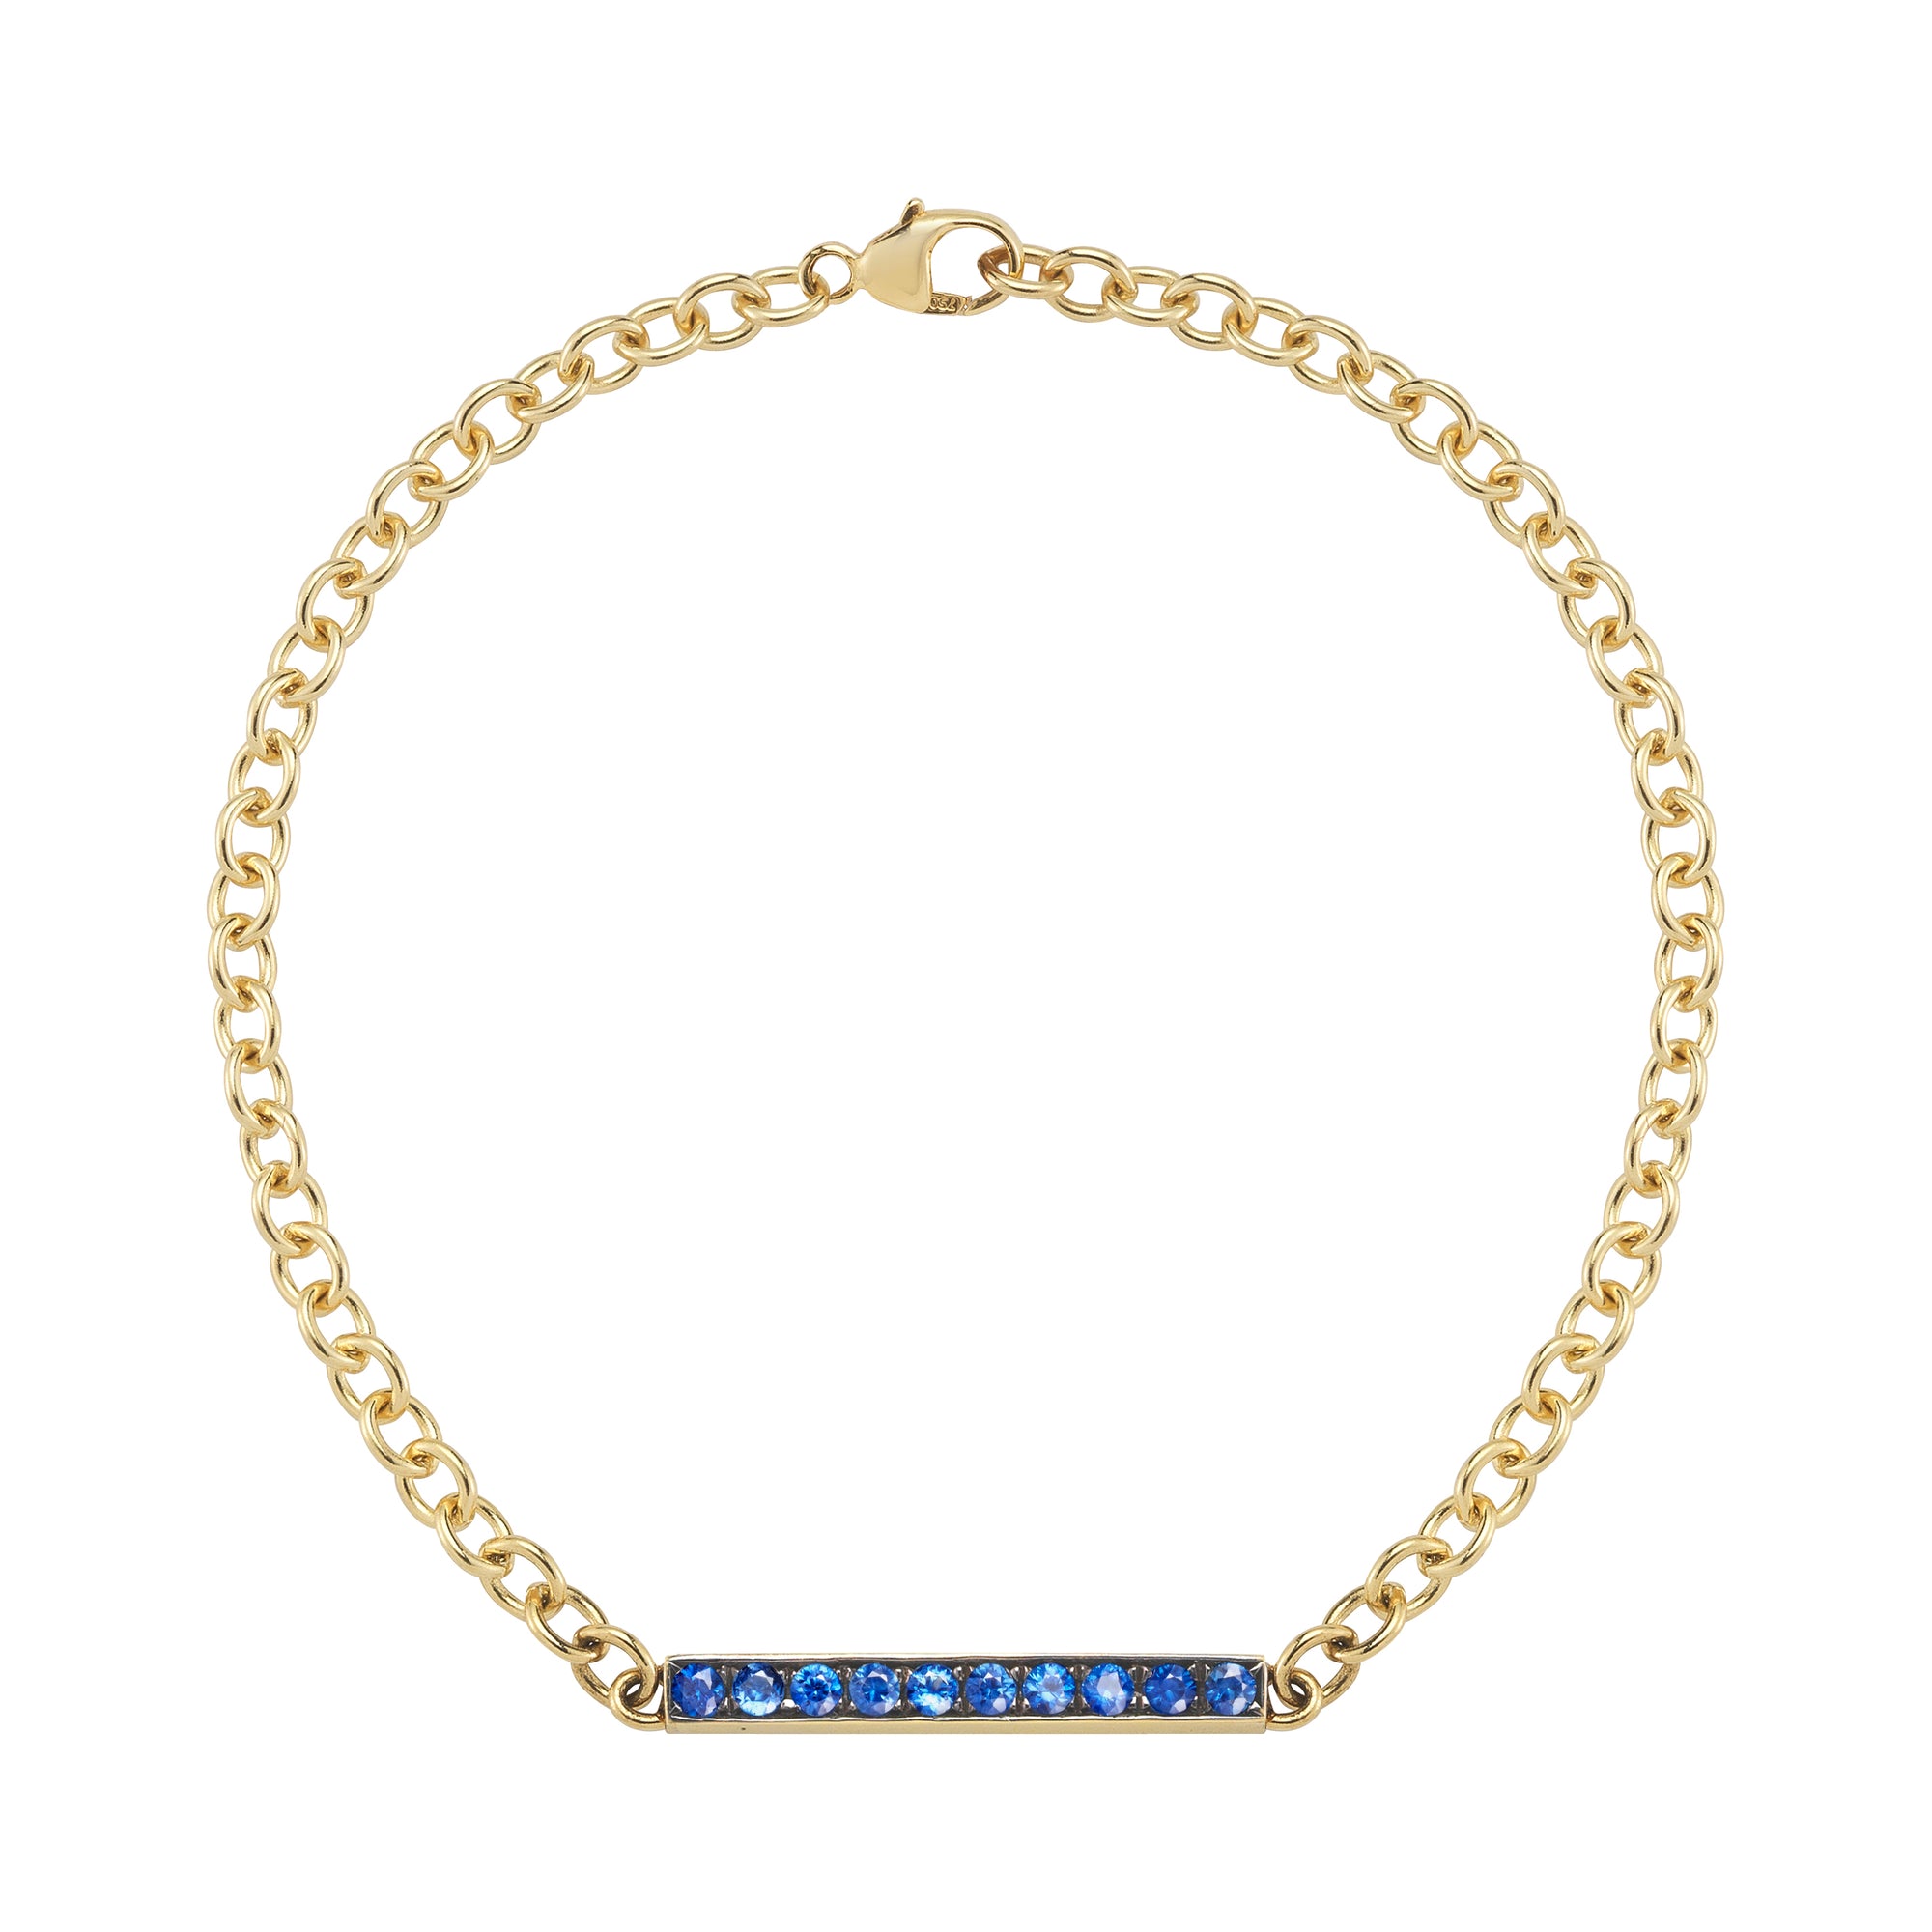 delicate 18k yellow gold chain bar bracelet with blue sapphire stones by finn by candice pool neistat